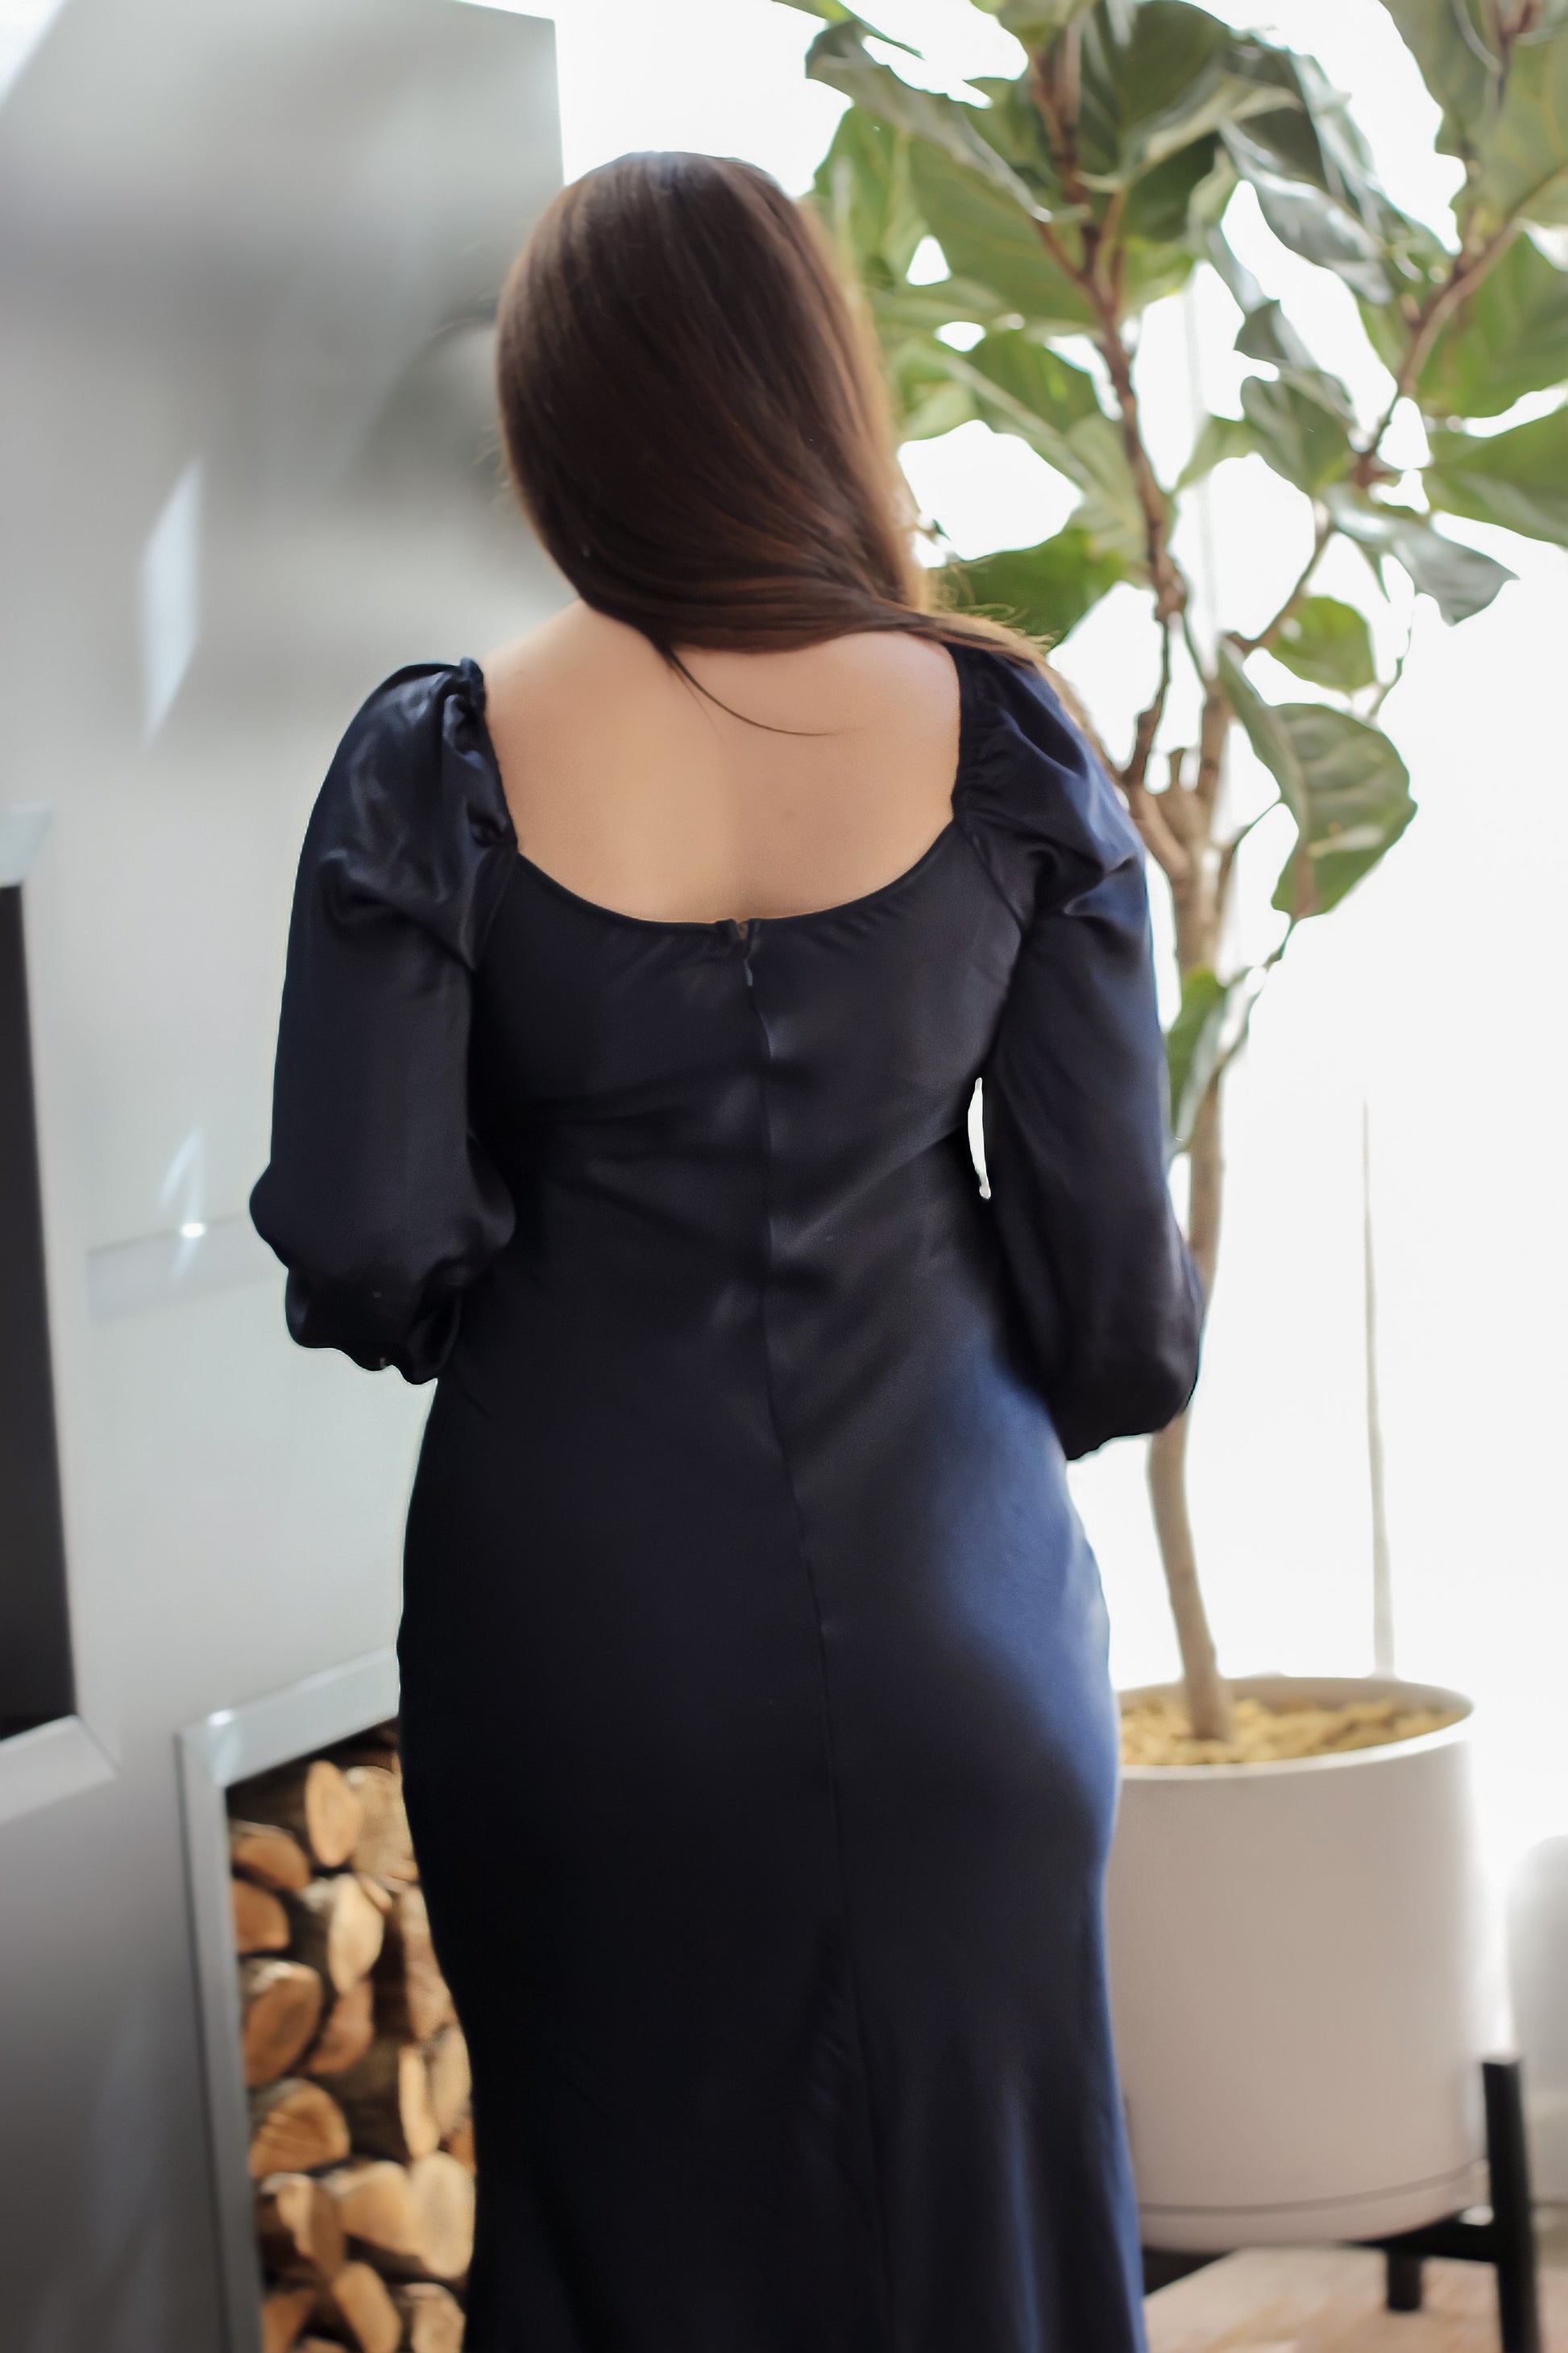 maxi slit long sleeve satin royal blue dark blue navy blue party Christmas evening gifts Christmas gift New Years eve party dress wedding guest dress puff sleeve button sleeve v neck low back sexy cute buttons instagram worthy New York vibes aesthetic photography